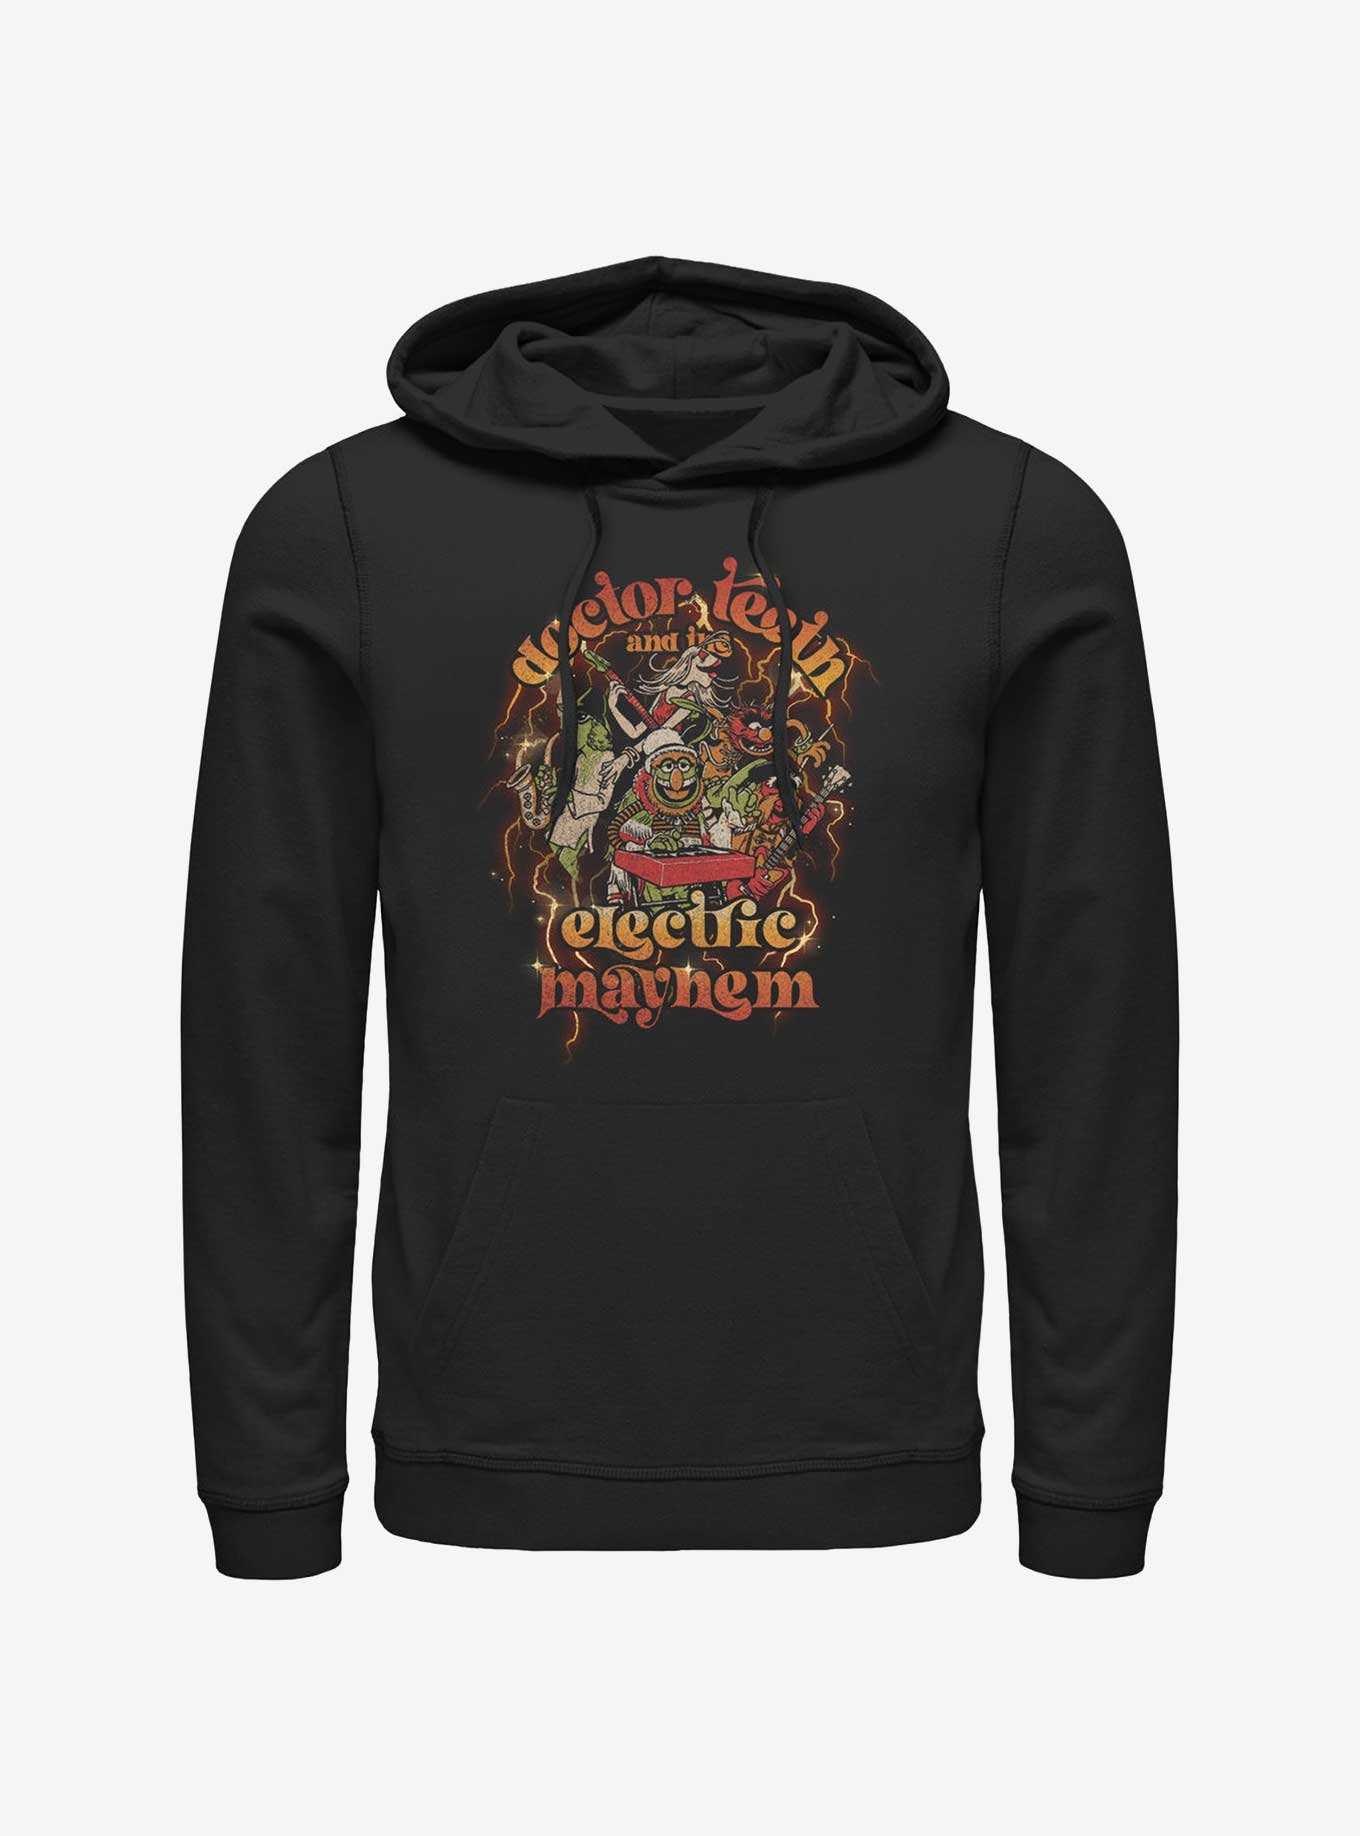 Disney The Muppets Doctor Teeth and the Electric Mayhem Hoodie, , hi-res